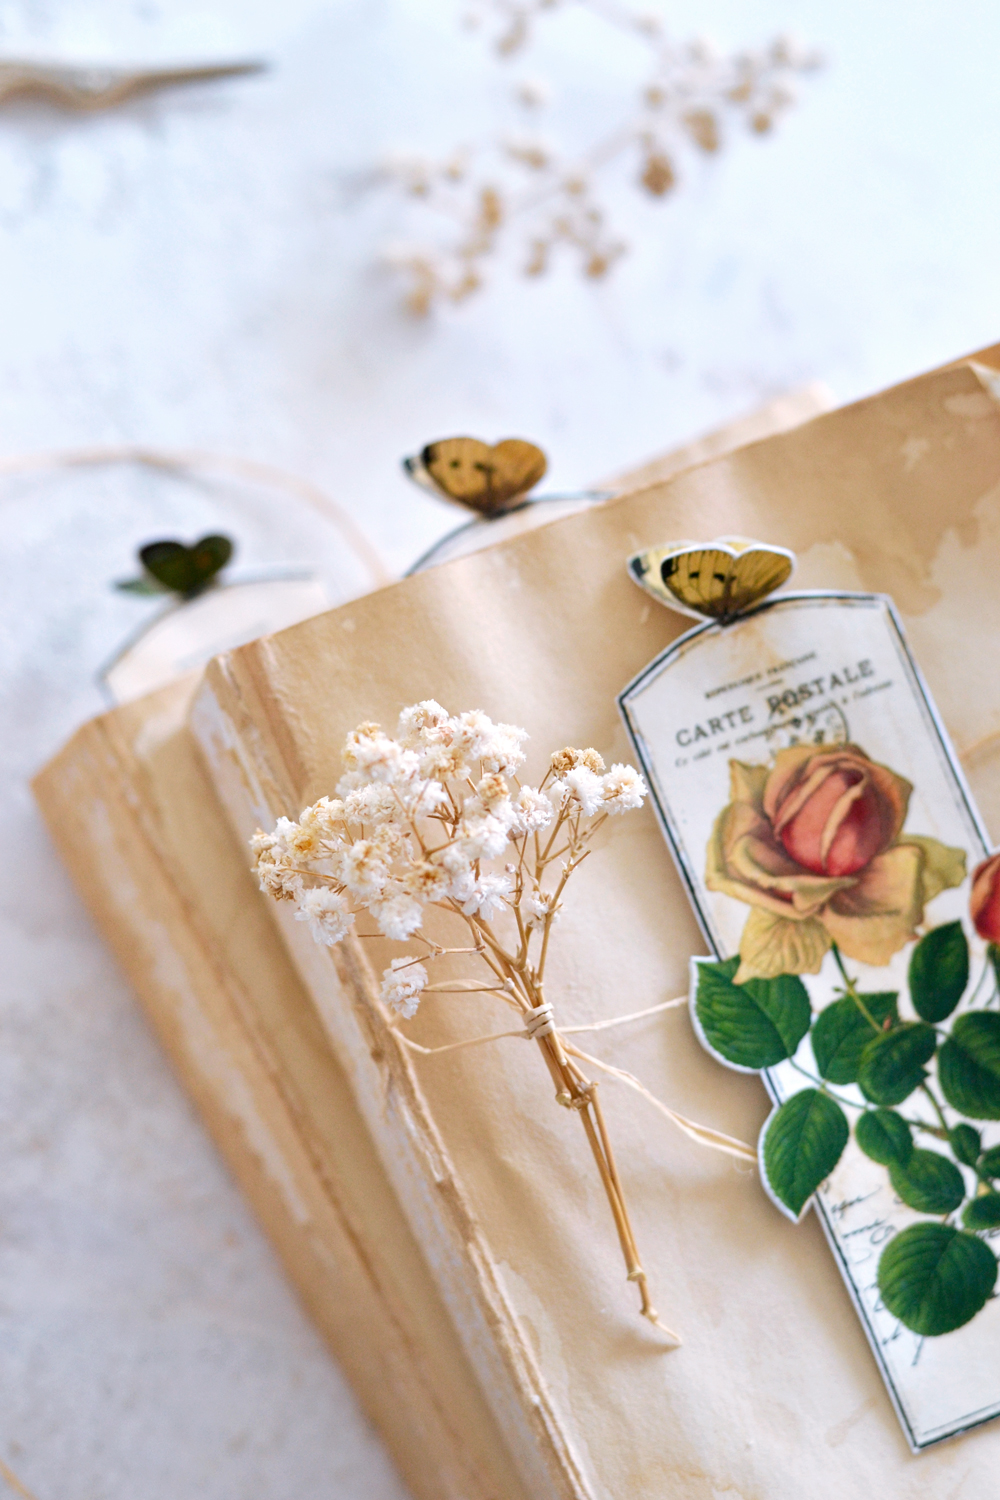 Roses and butterfly bookmarks with flowers and book